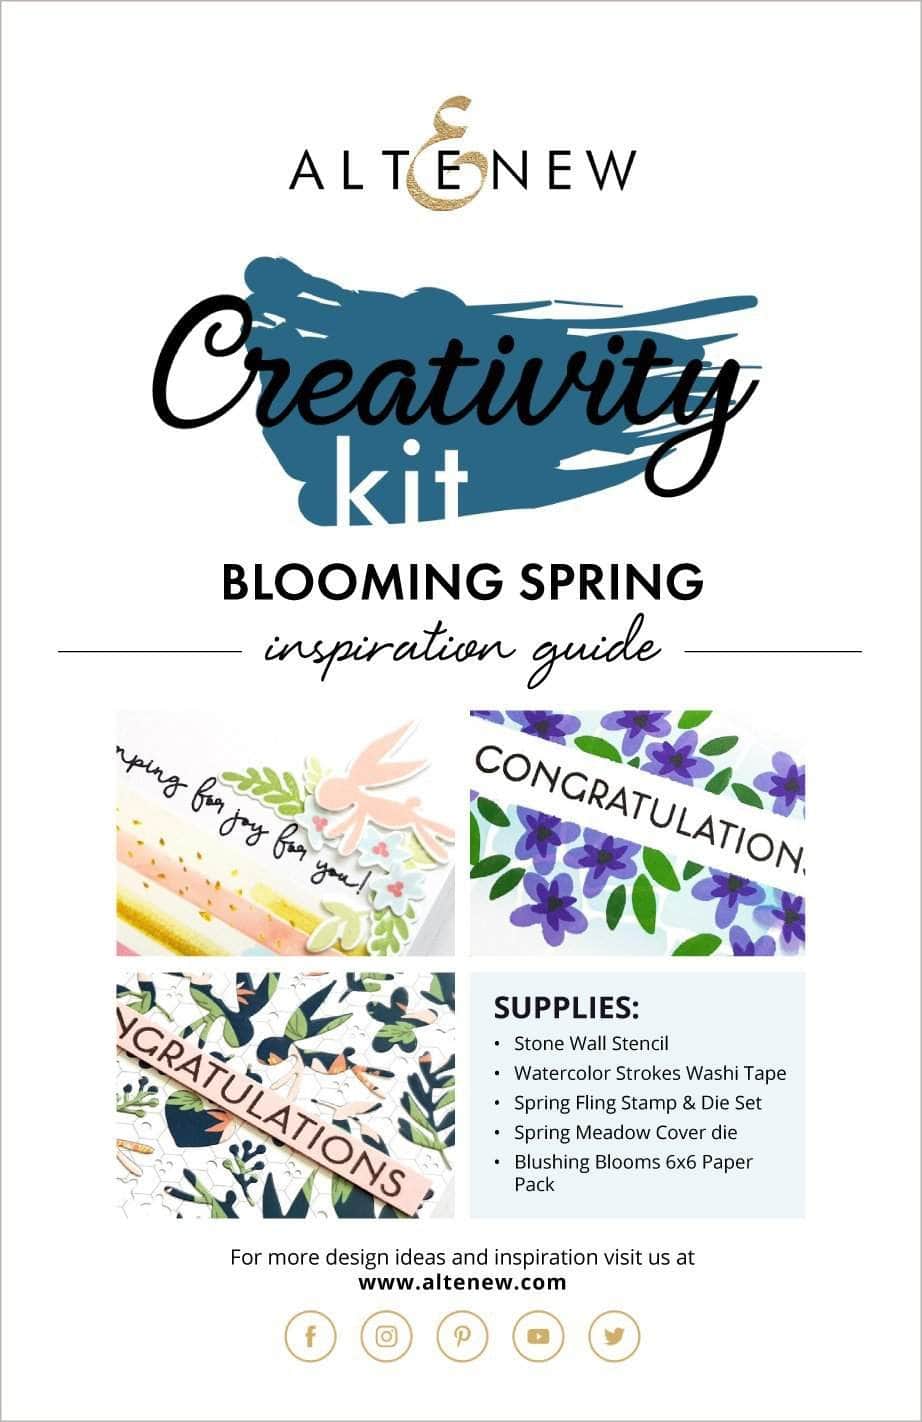 Printed Media Blooming Spring Creativity Kit Inspiration Guide